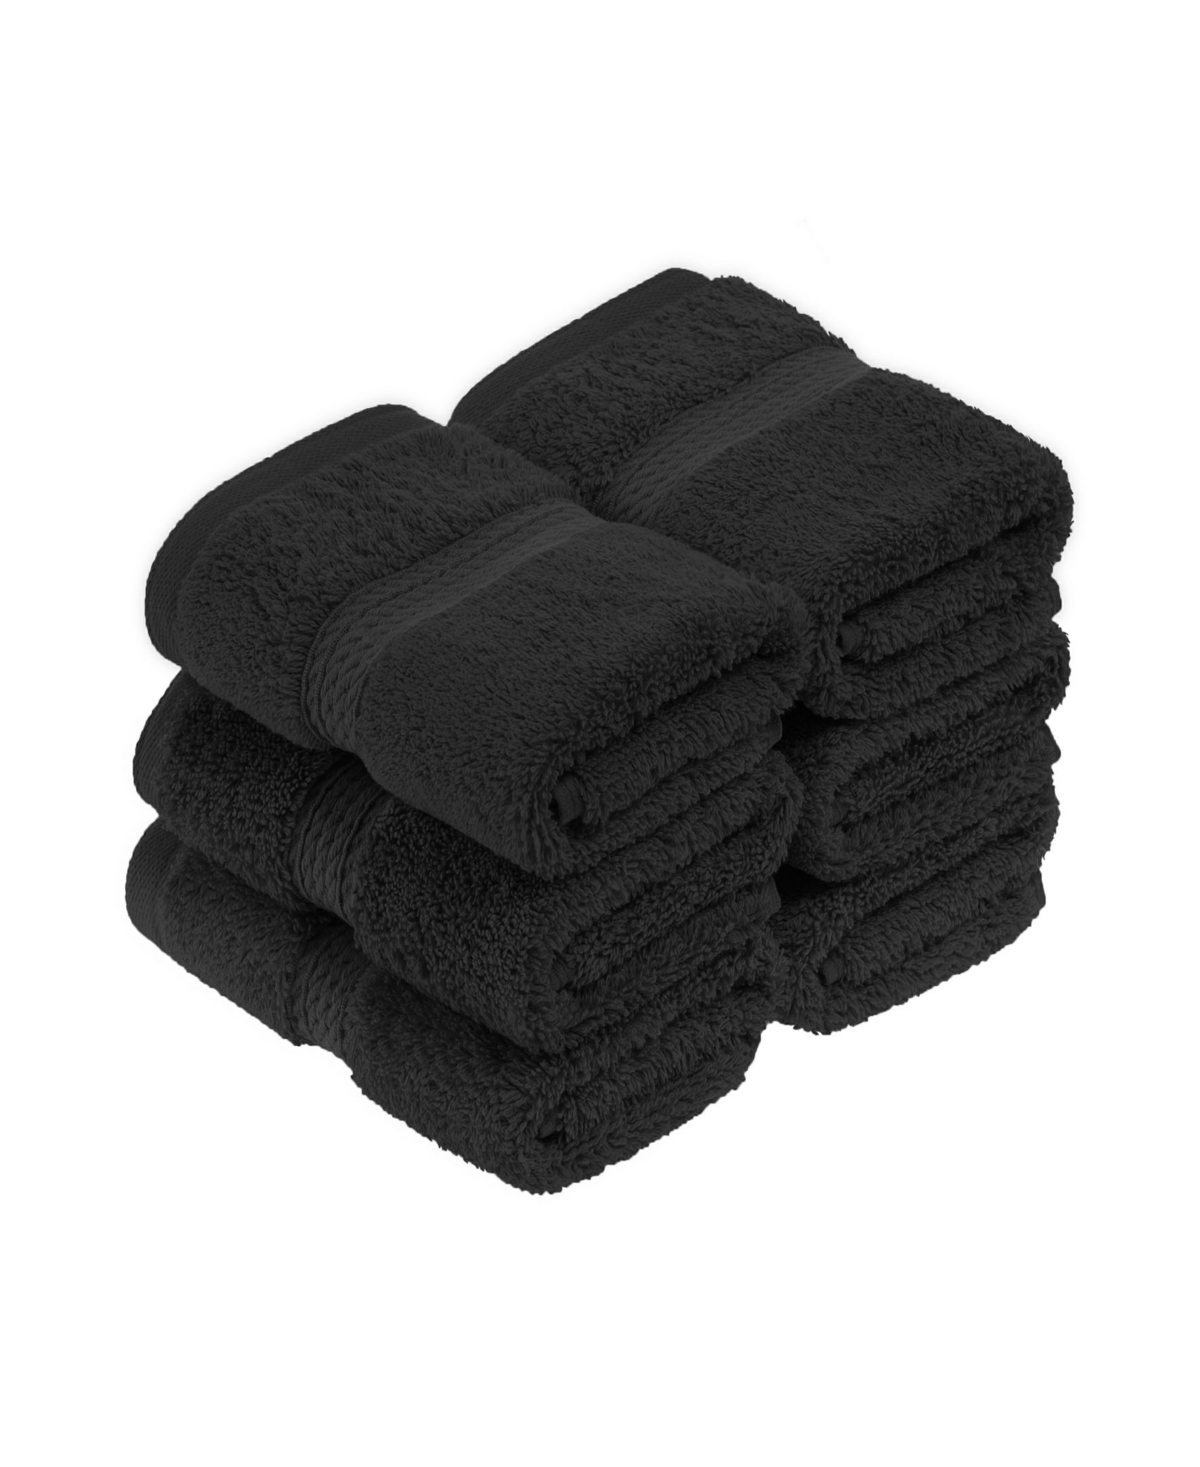 Superior Highly Absorbent 6 Piece Egyptian Cotton Ultra Plush Solid Face Towel Set Bedding In Black